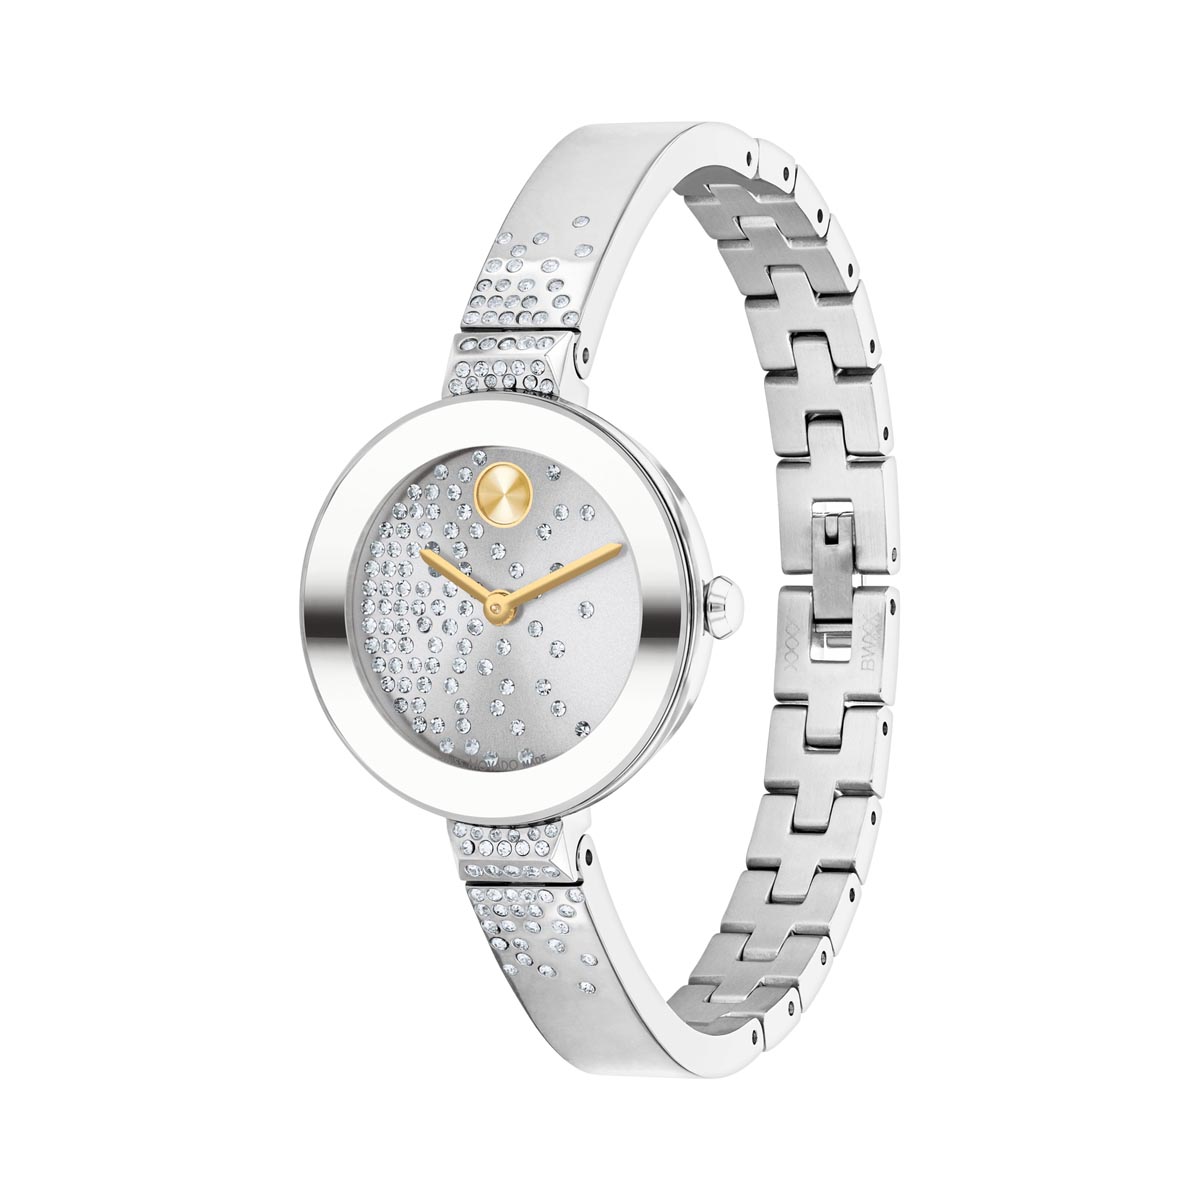 Movado Bold Womens Watch with White Crystal Dial and Stainless Steel Bangle Bracelet (Swiss quartz movement)